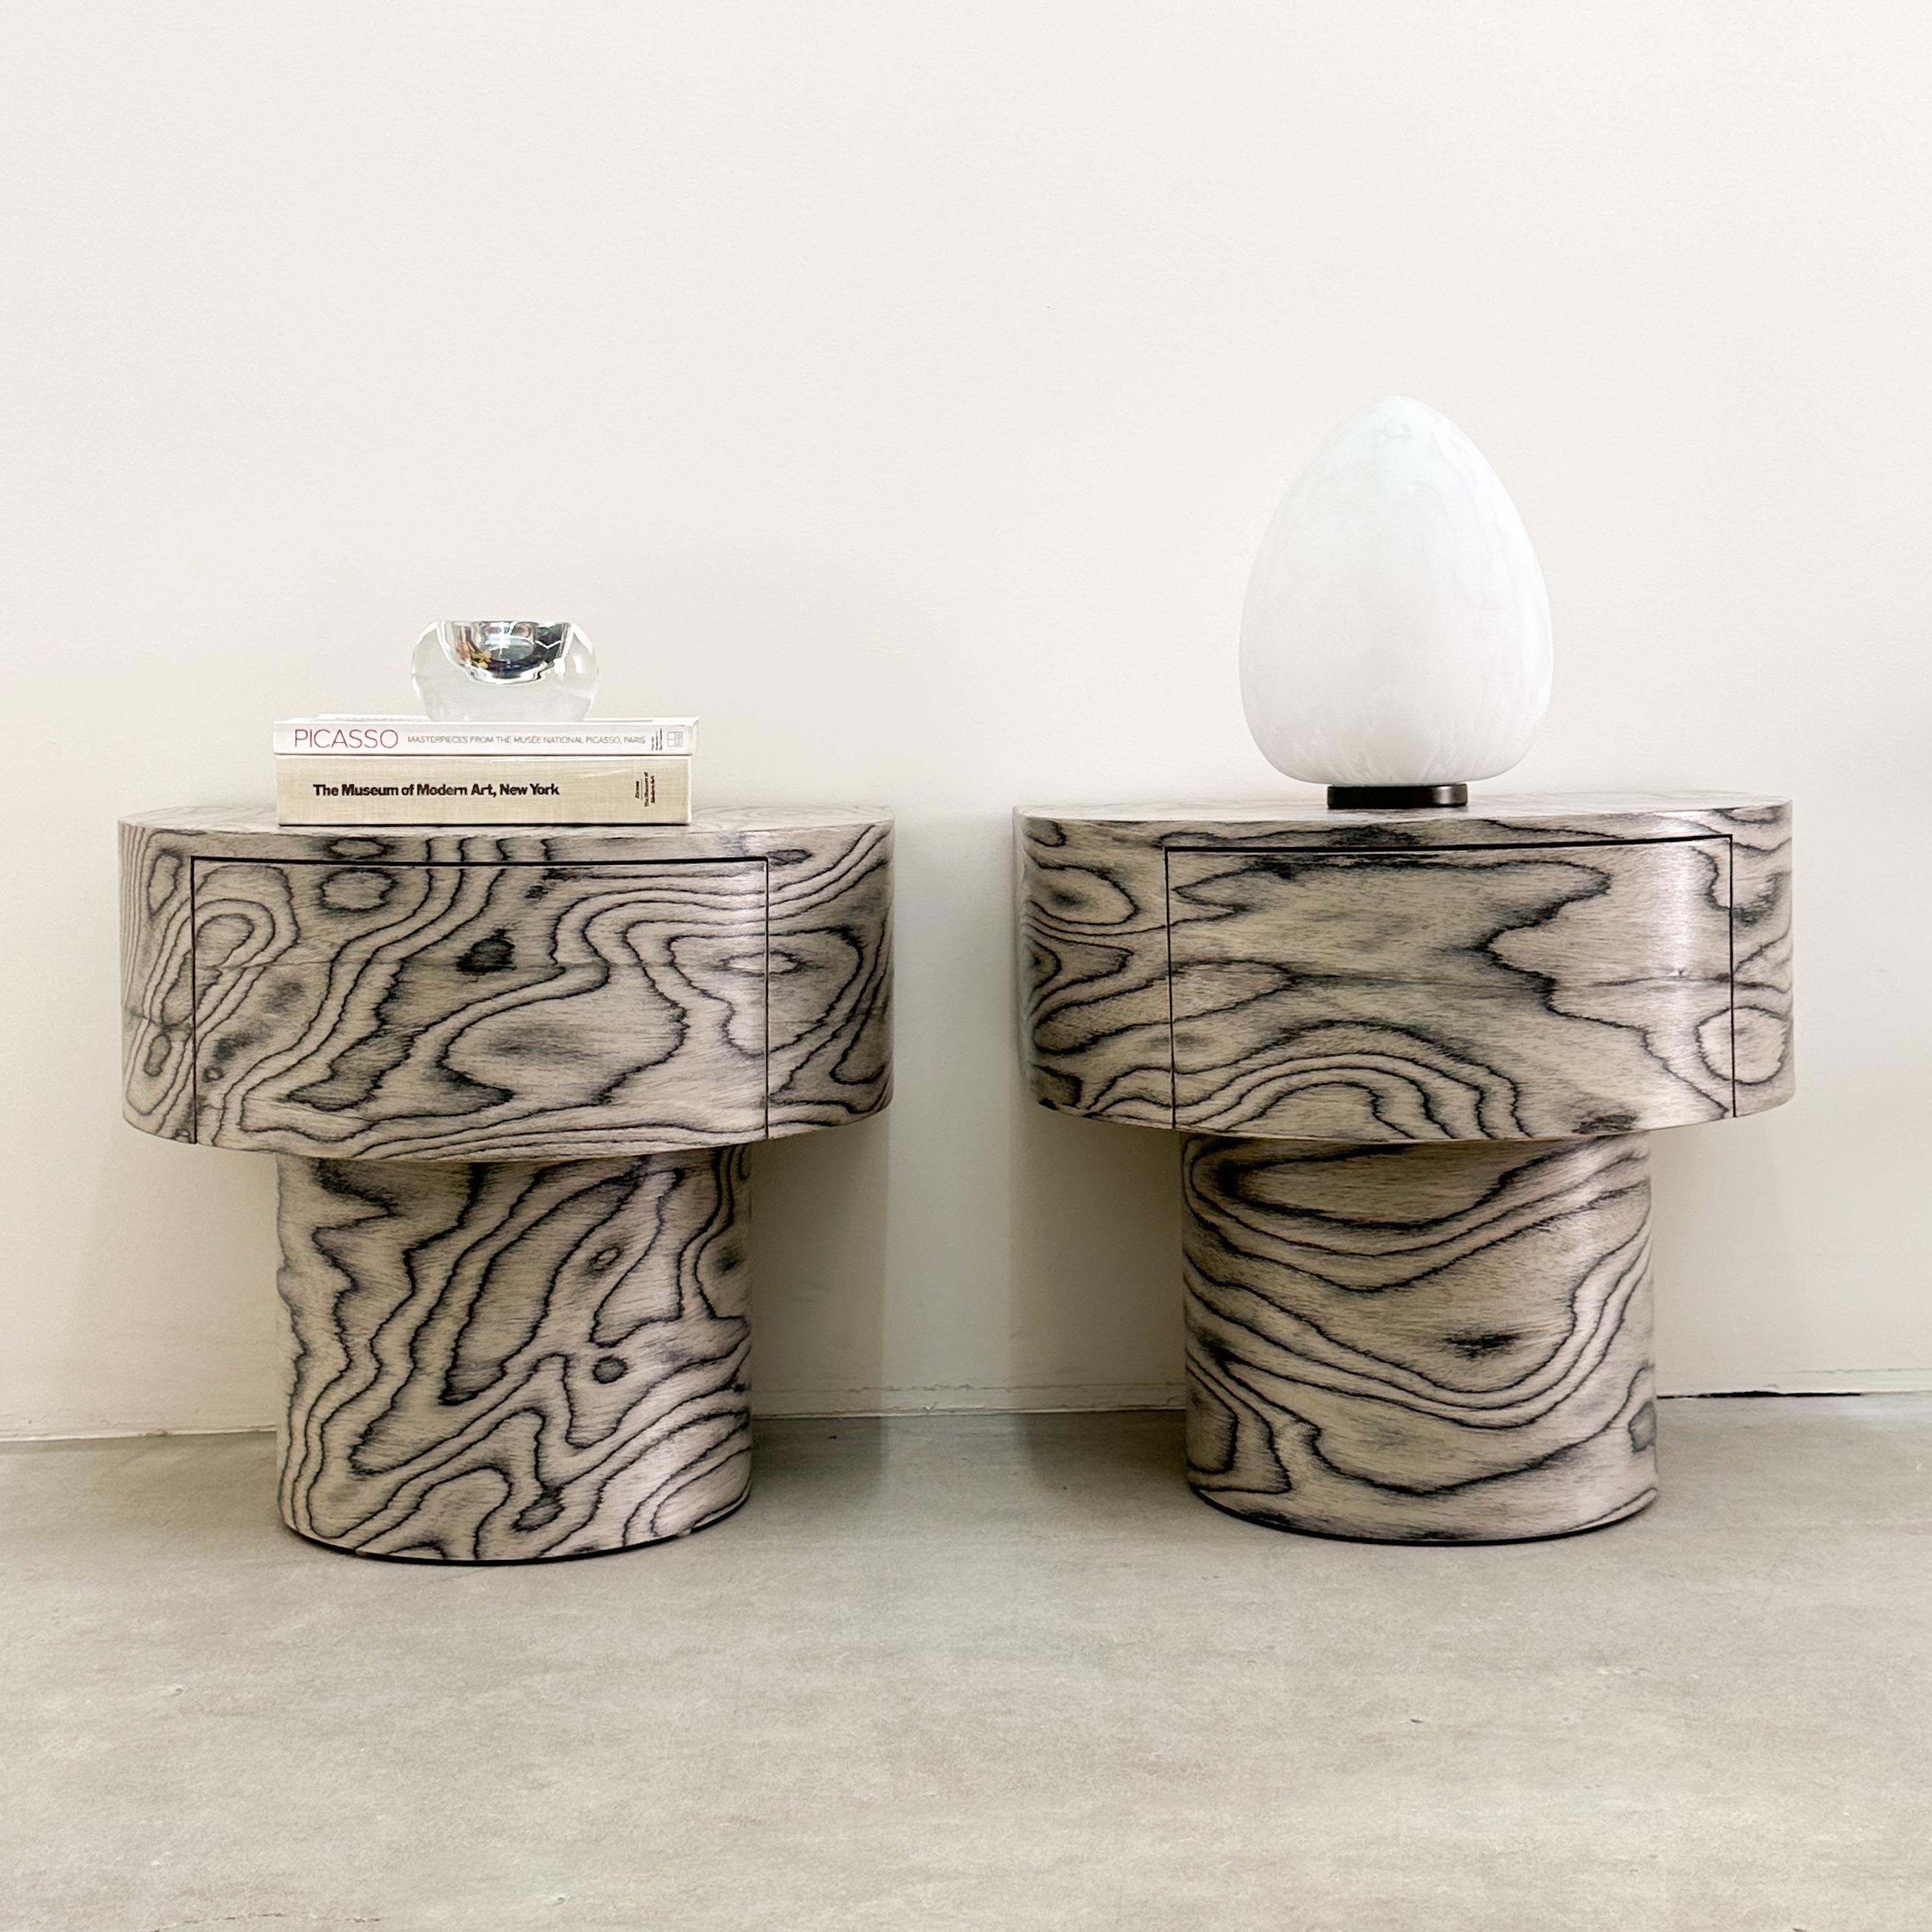 Vintage Round Nightstands Featuring Ettore Sottsass Veneer.

The vintage nightstands have been re-veneered with the original Ettore Sottsass pattern from 1985.
ALPI manufactures the distinctive veneer.
It has been sealed with a satin finish for